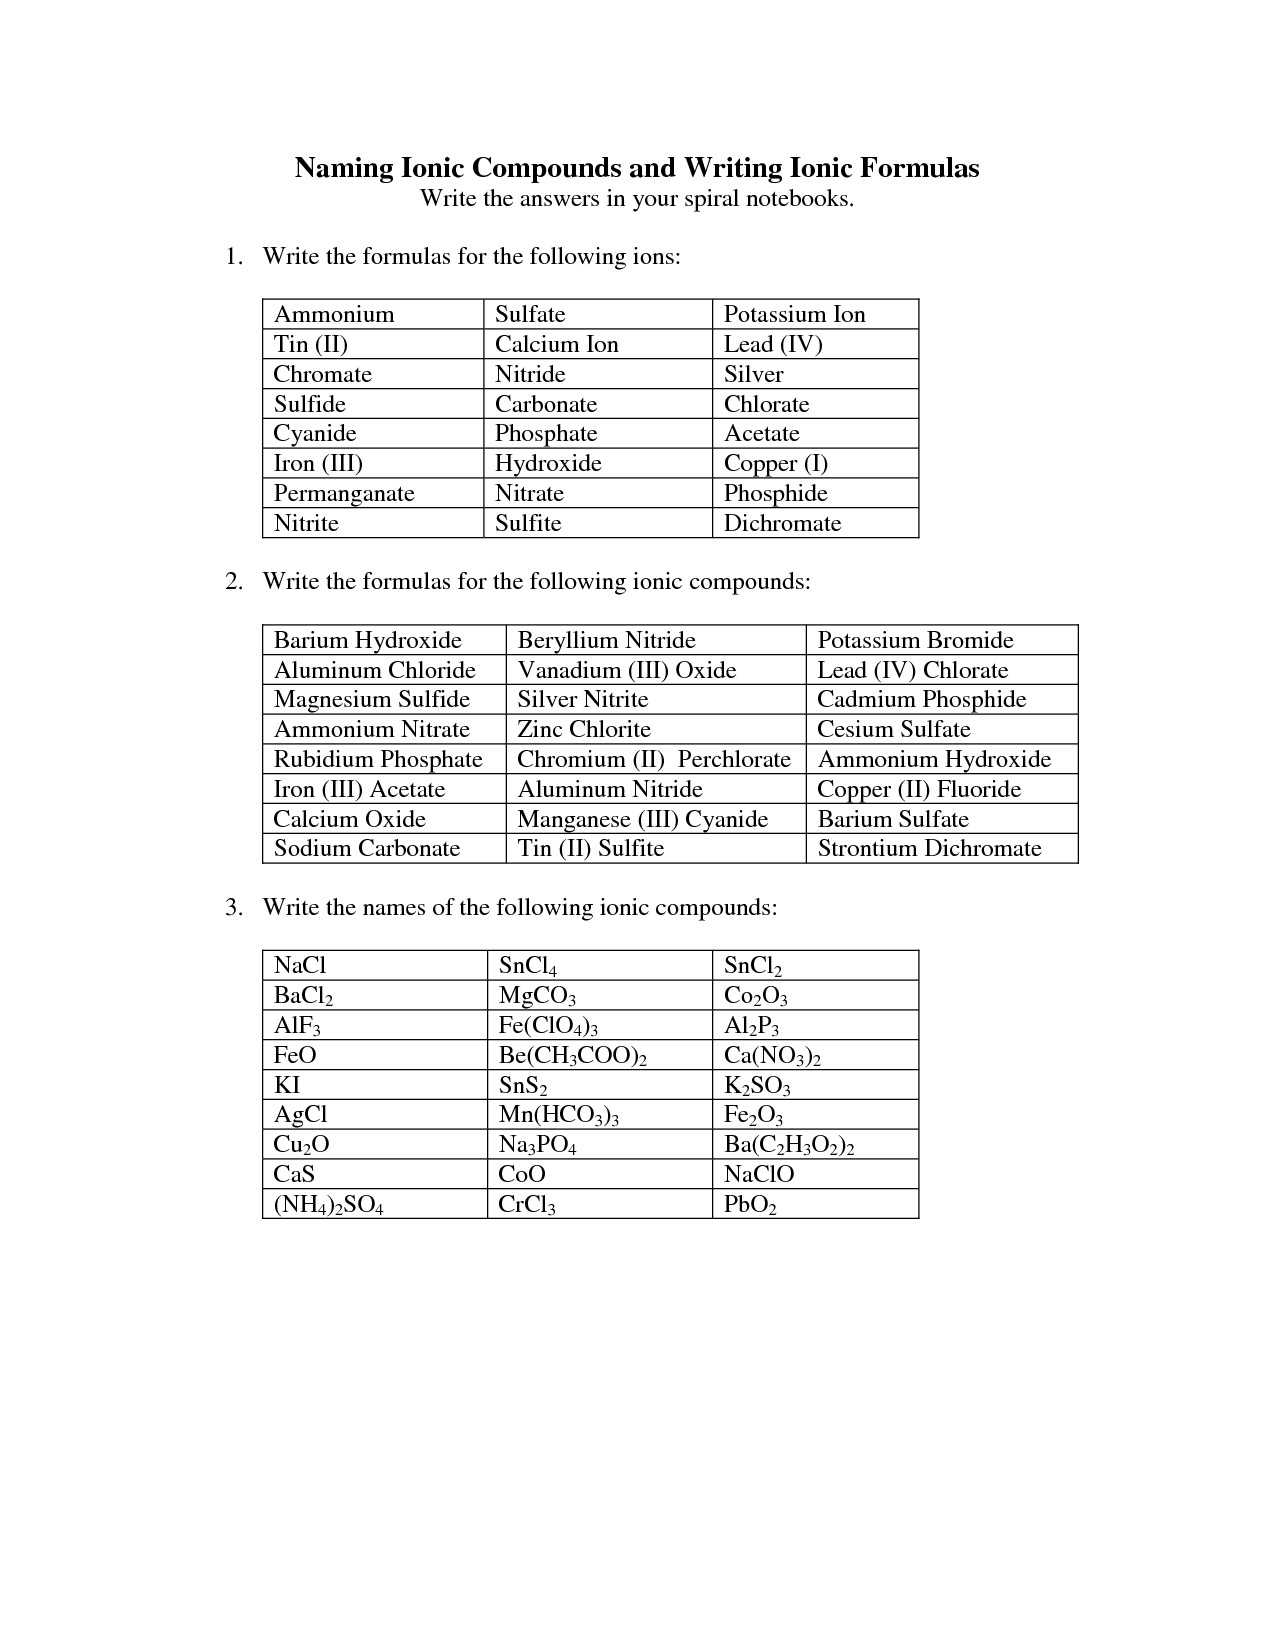 Naming Chemical Compounds Worksheet together with Writing Chemical formulas for Binary Ionic Pounds Worksheet